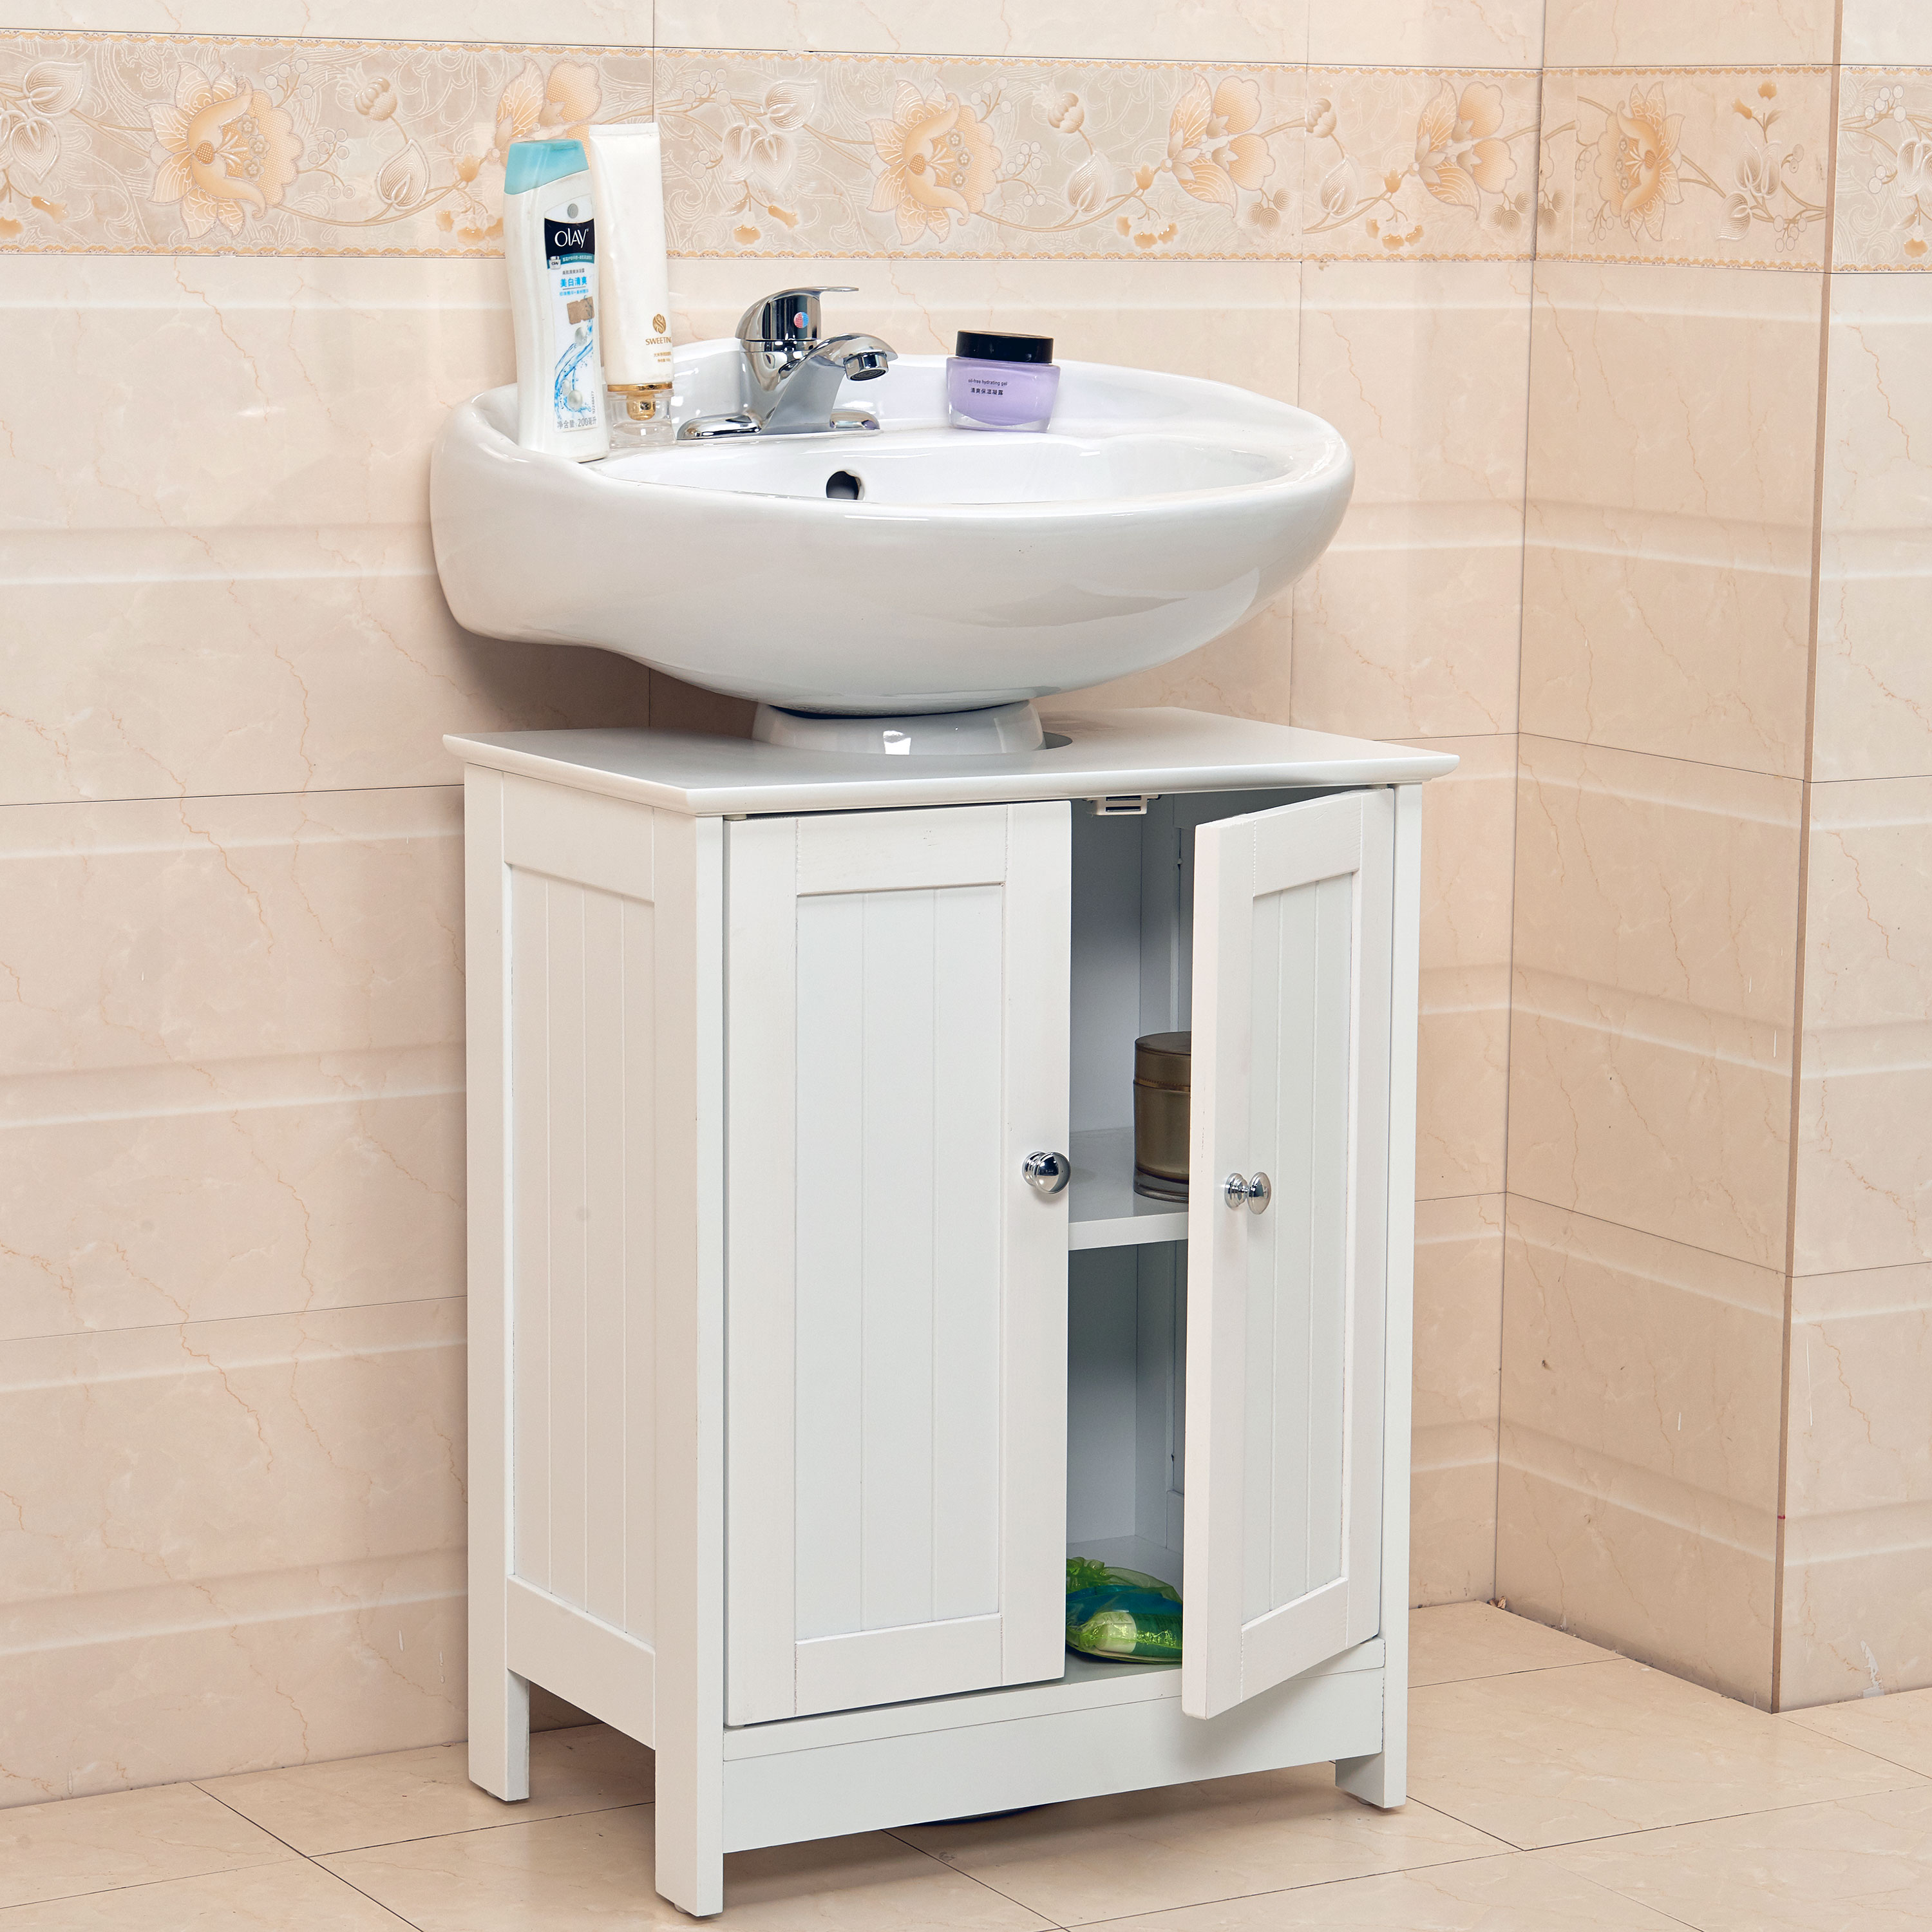  Small Bathroom Sink Cabinet Storage for Living room